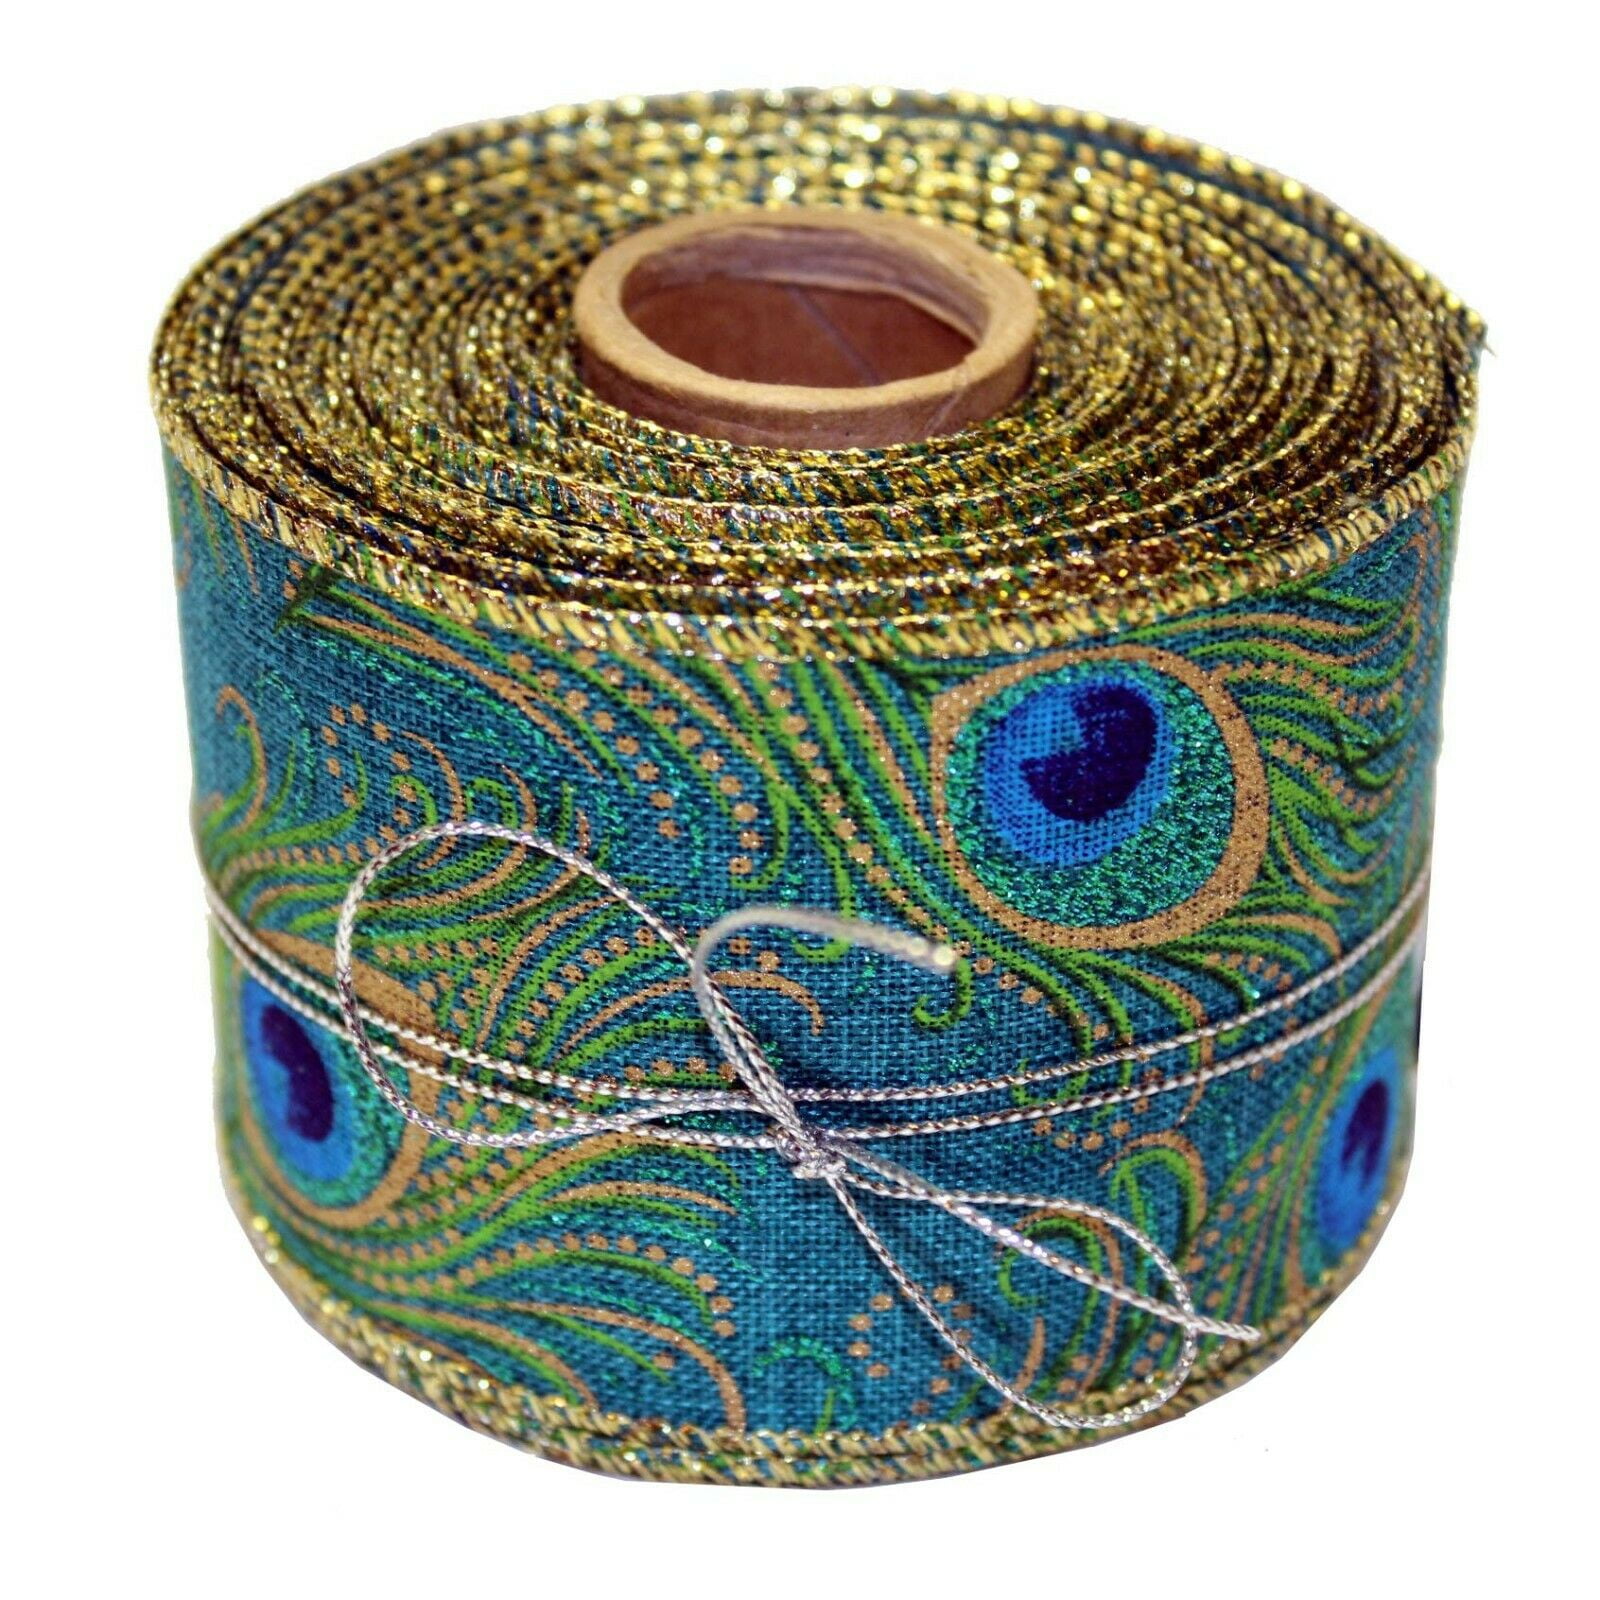 Peacock Diamond Dust Ribbon 1.5” x 10 Yards, Farrrisilk Luxury Ribbon for  Wreaths, Crafts or Floral Designs RP283-77